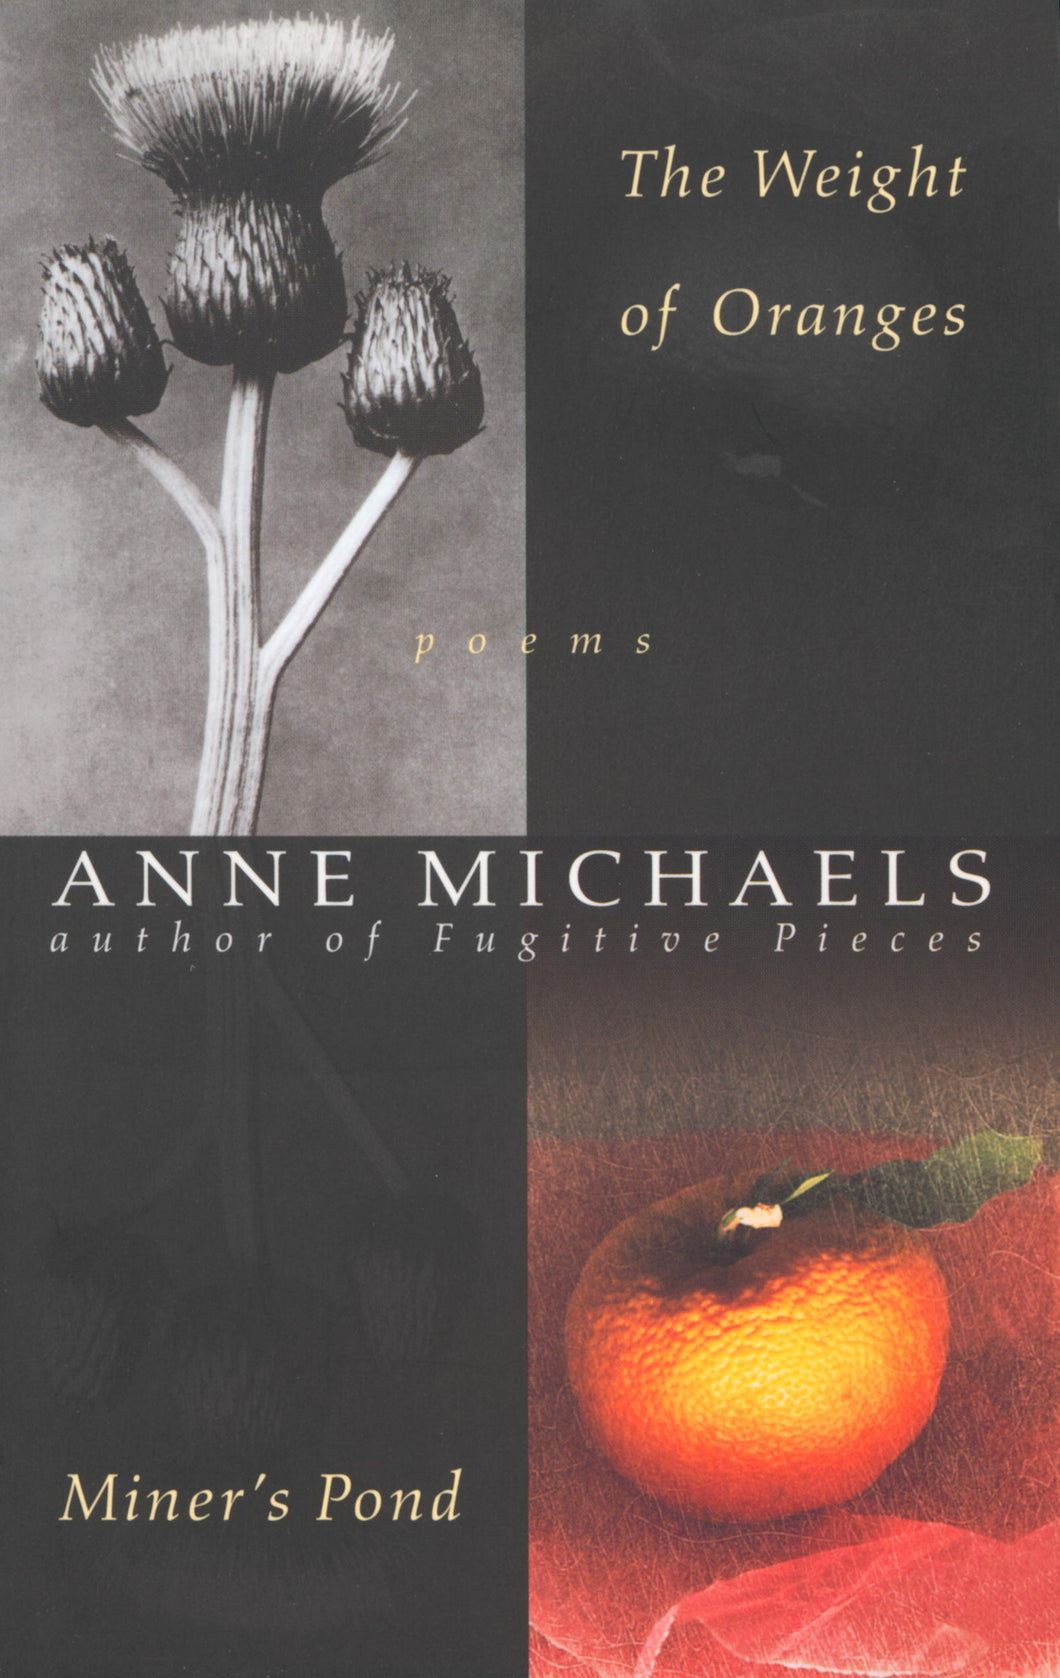 The Weight of Oranges/Miner's Pond